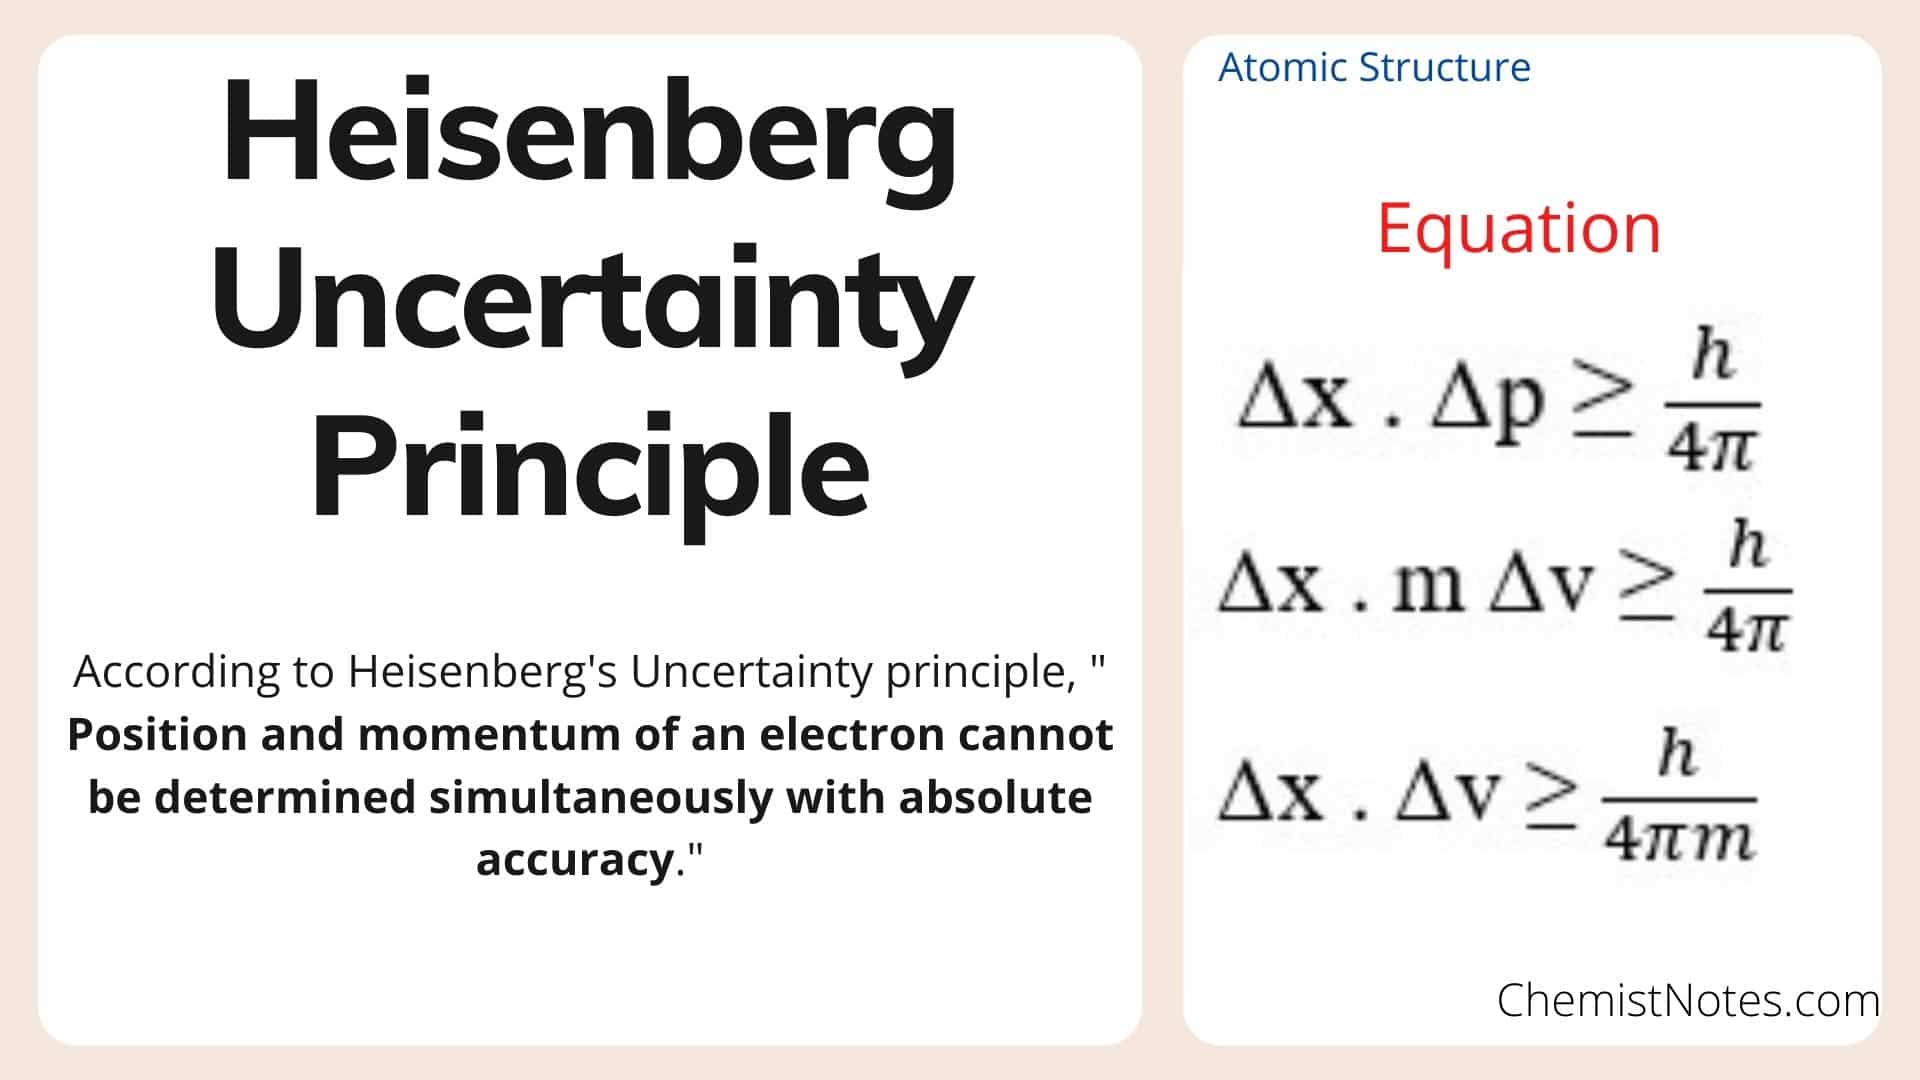 Heisenberg Uncertainty Principle Definition, Equation, and Application ...